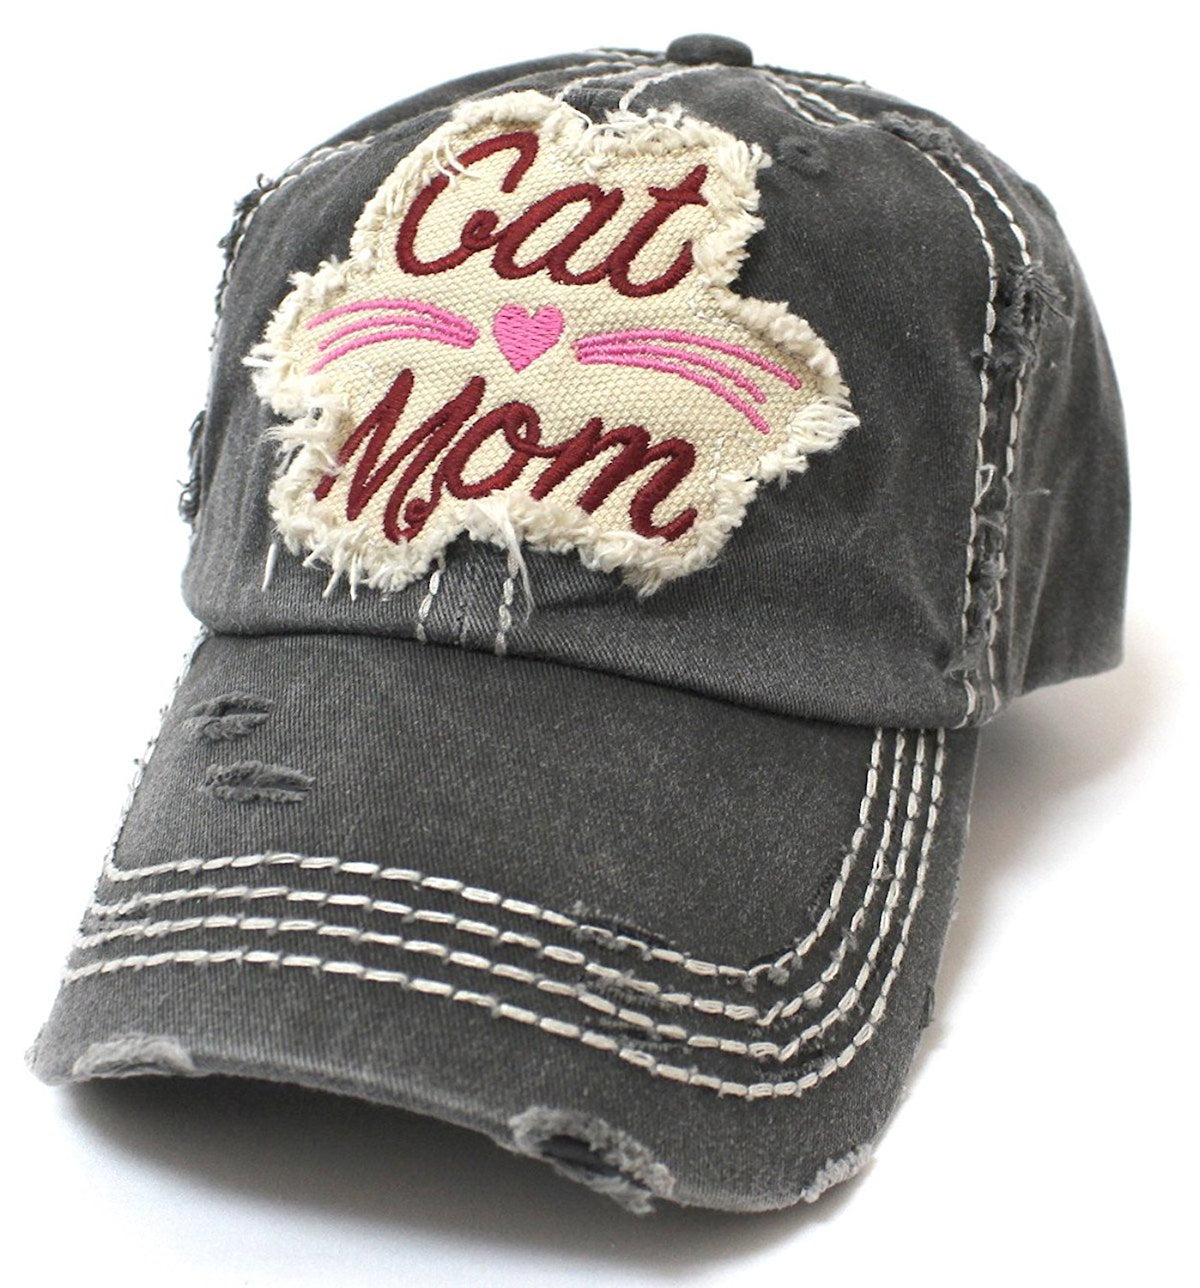 CAPS 'N VINTAGE BLK Cat Mom Heart & Whiskers Patch Embroidery Baseball Hat - Caps 'N Vintage 